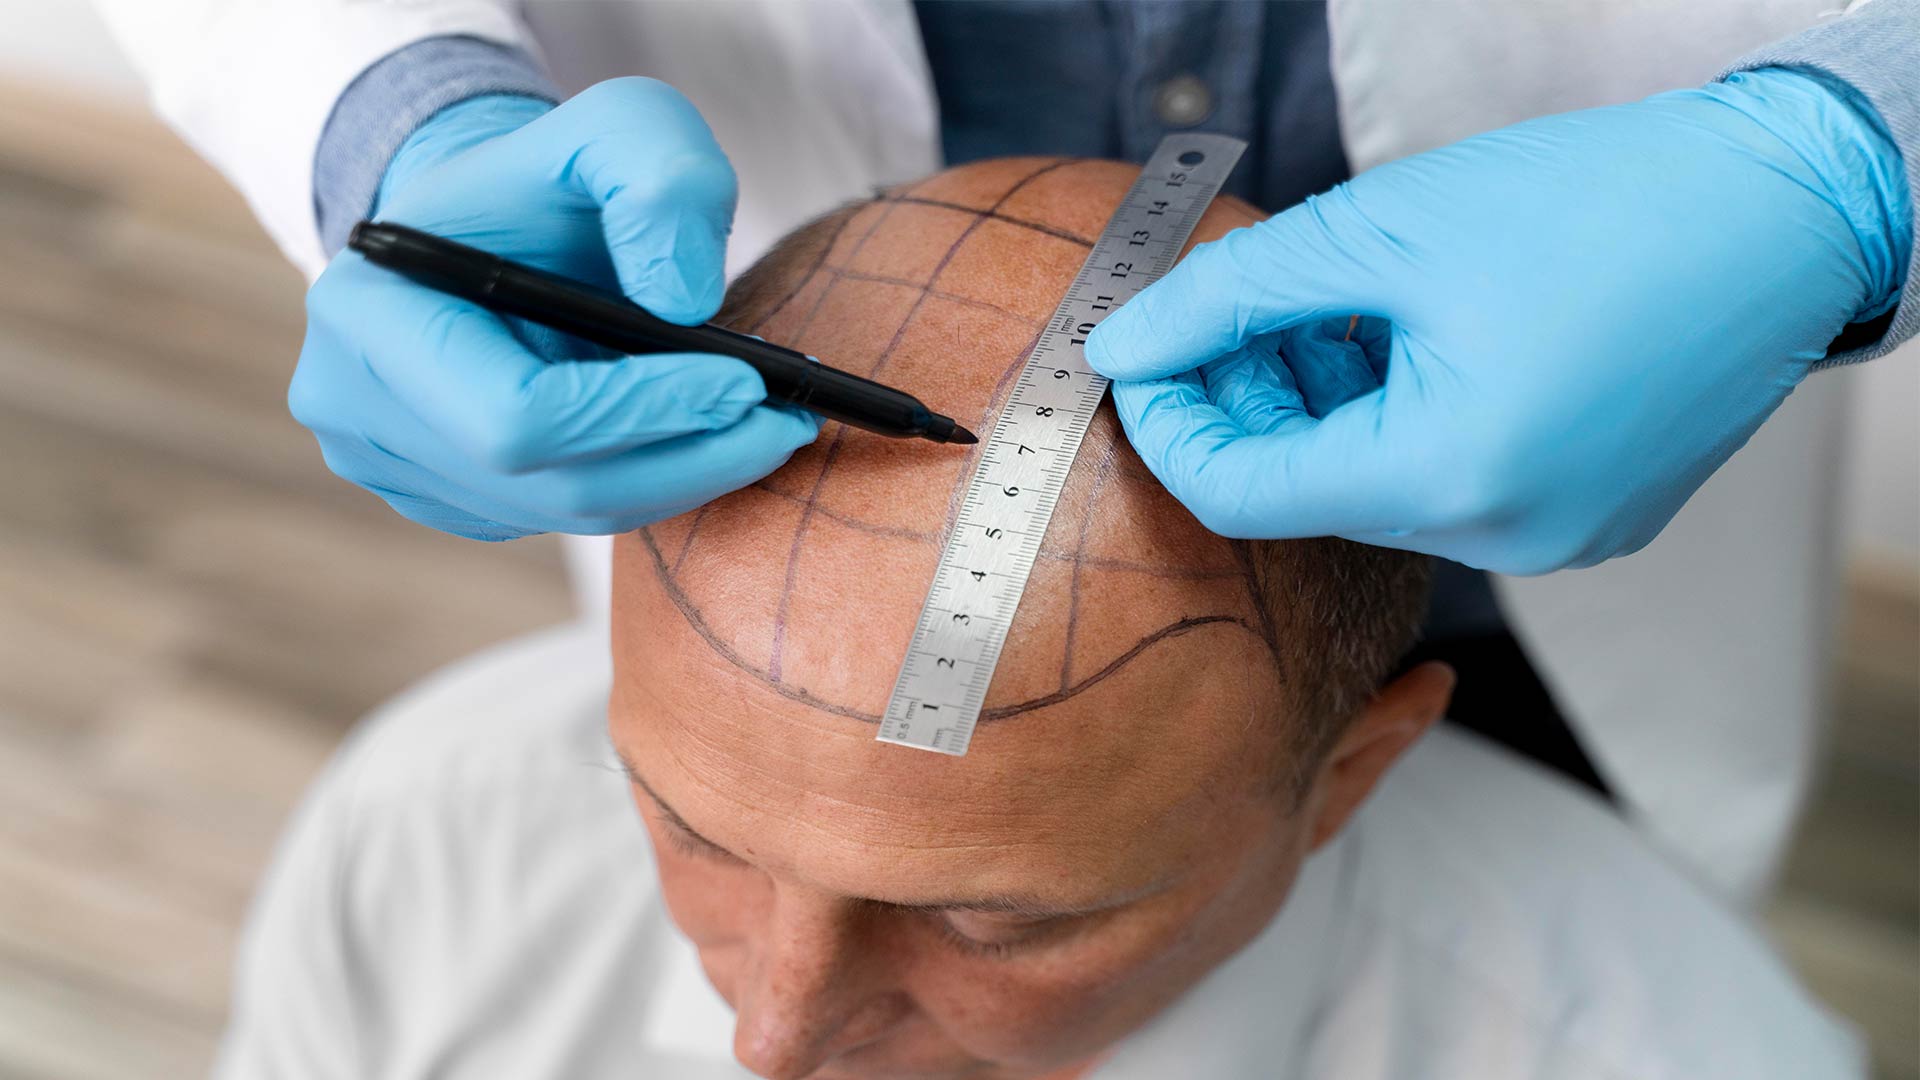 Which City In Turkey Has The Best Hair Transplant?